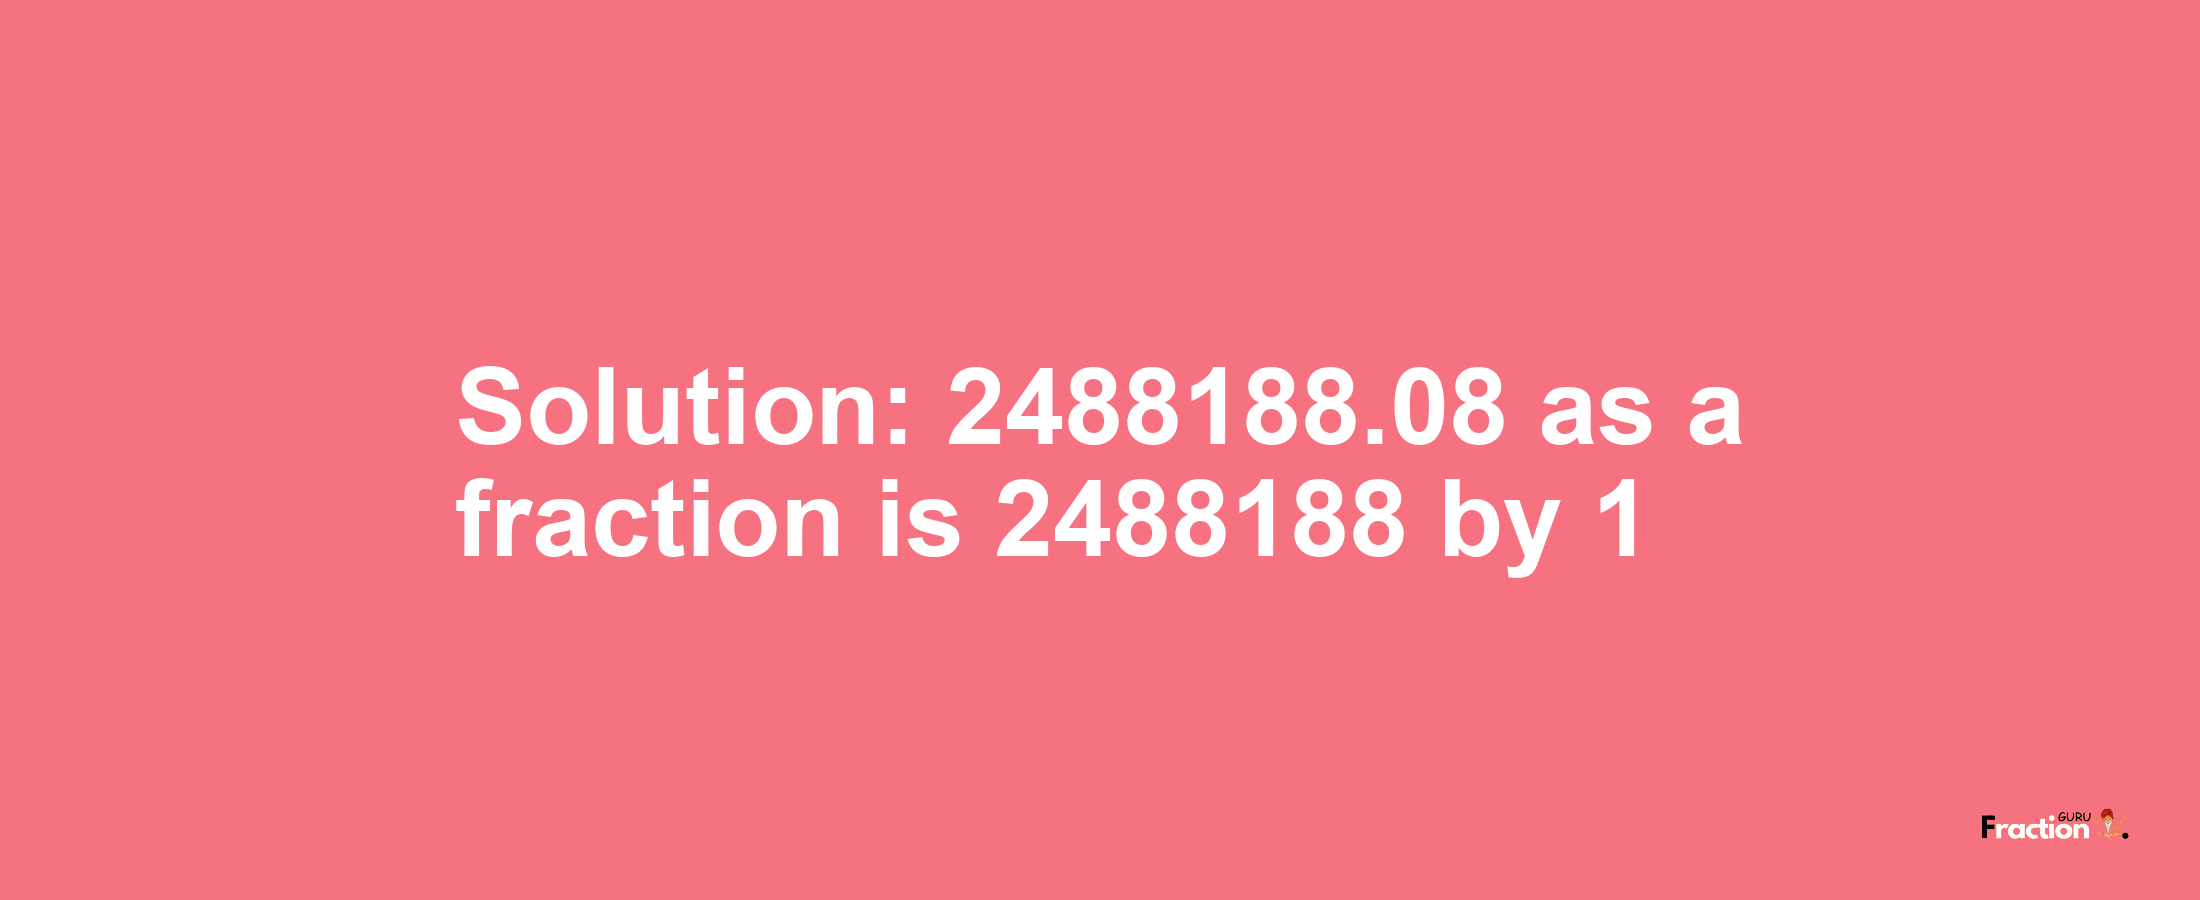 Solution:2488188.08 as a fraction is 2488188/1